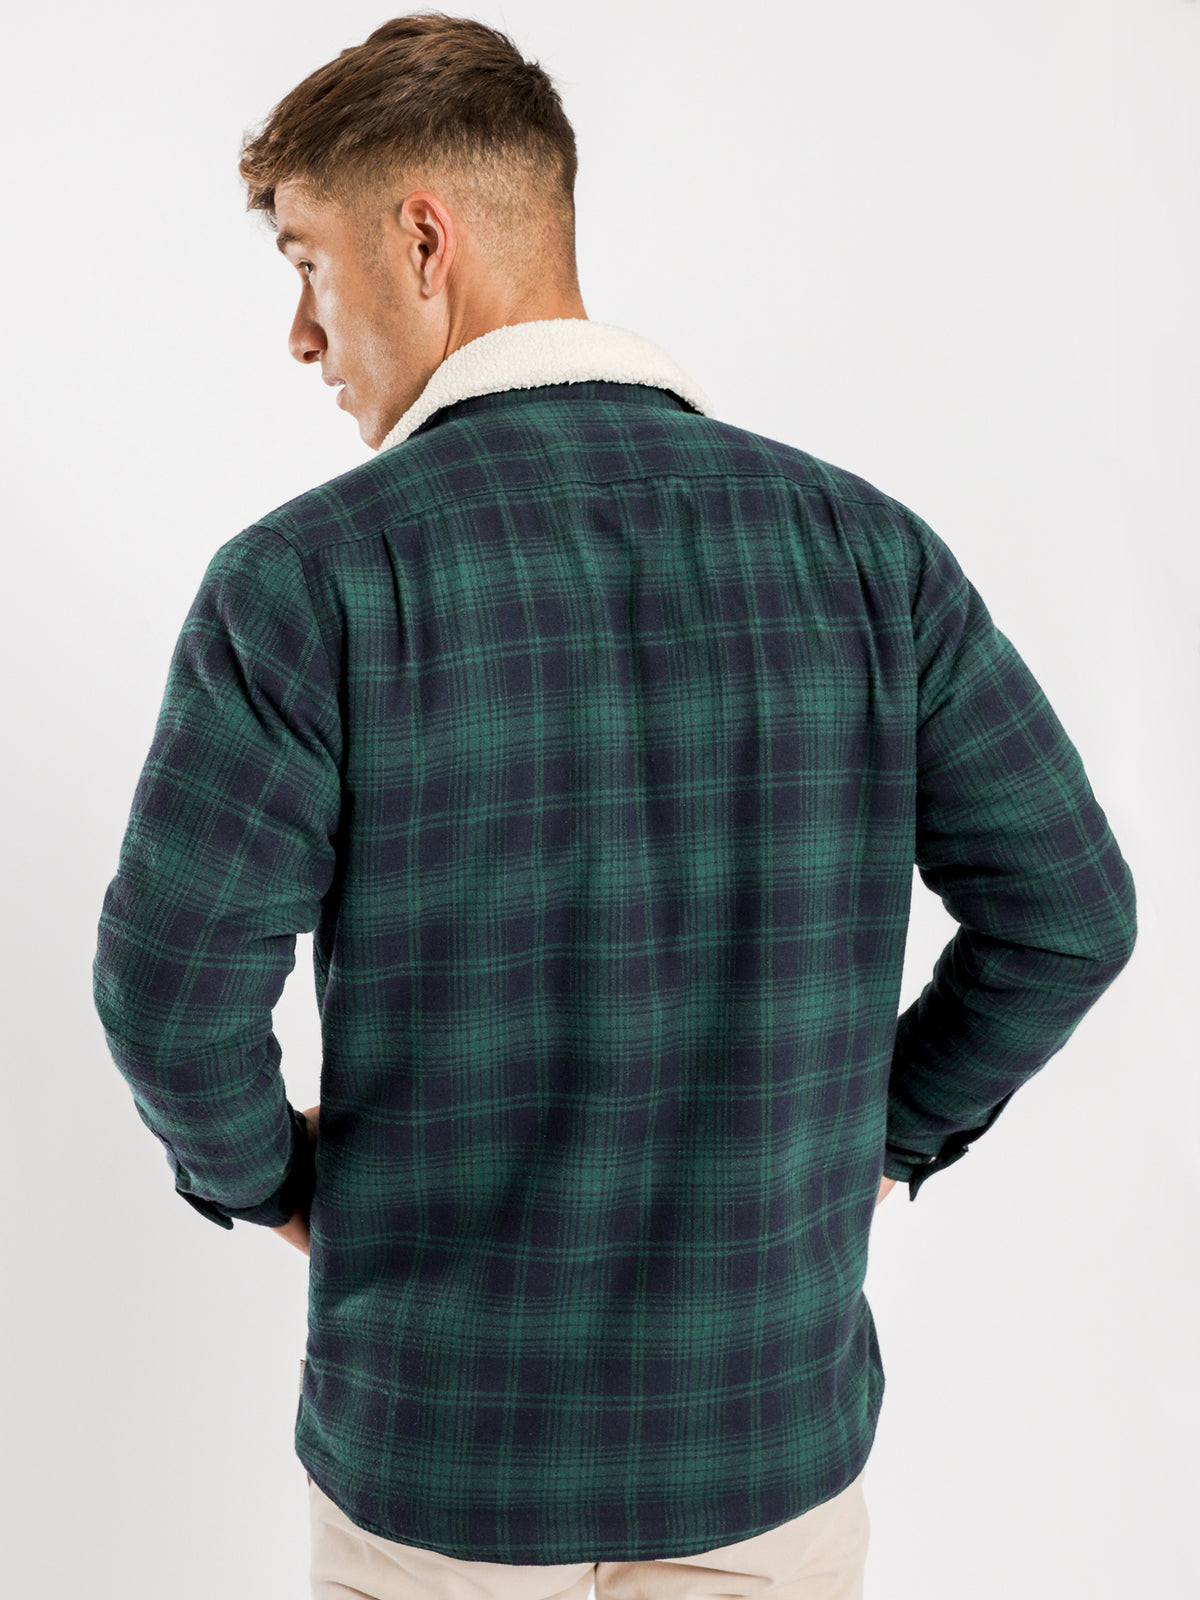 Knox Plaid Sherpa Jacket in Forest